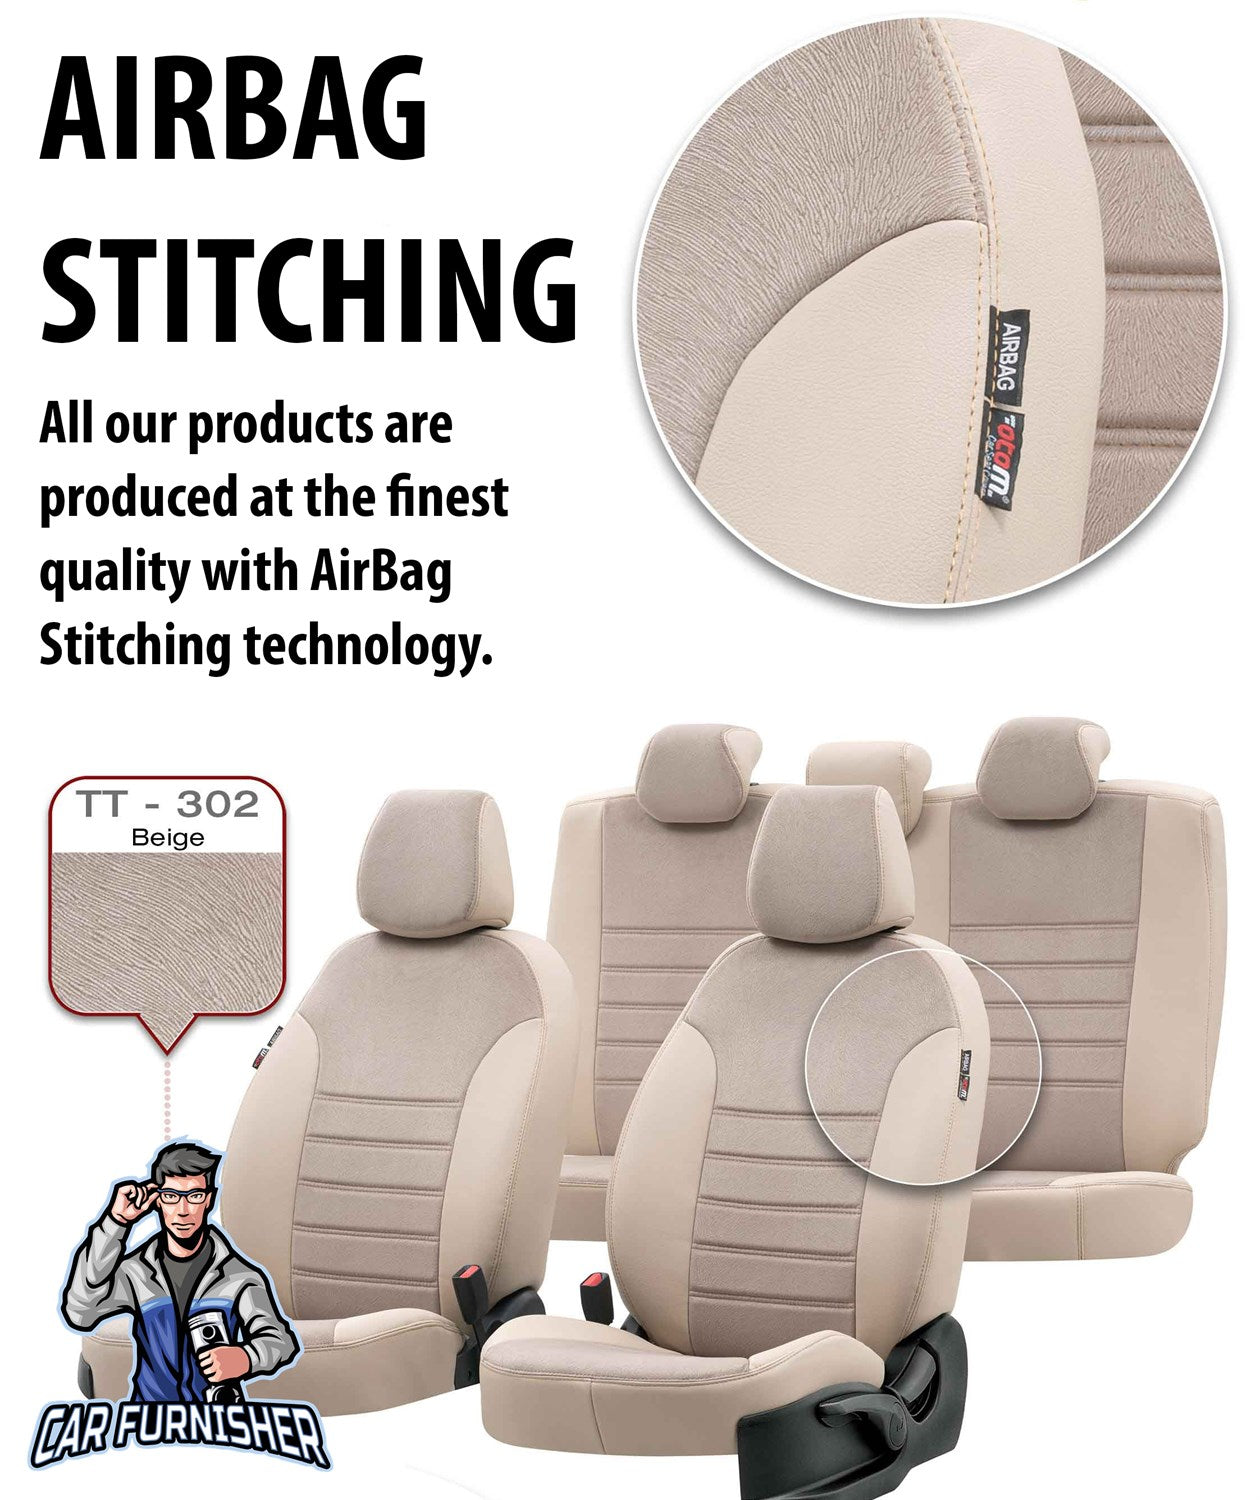 Volkswagen Caravelle Seat Cover London Foal Feather Design Red Leather & Foal Feather